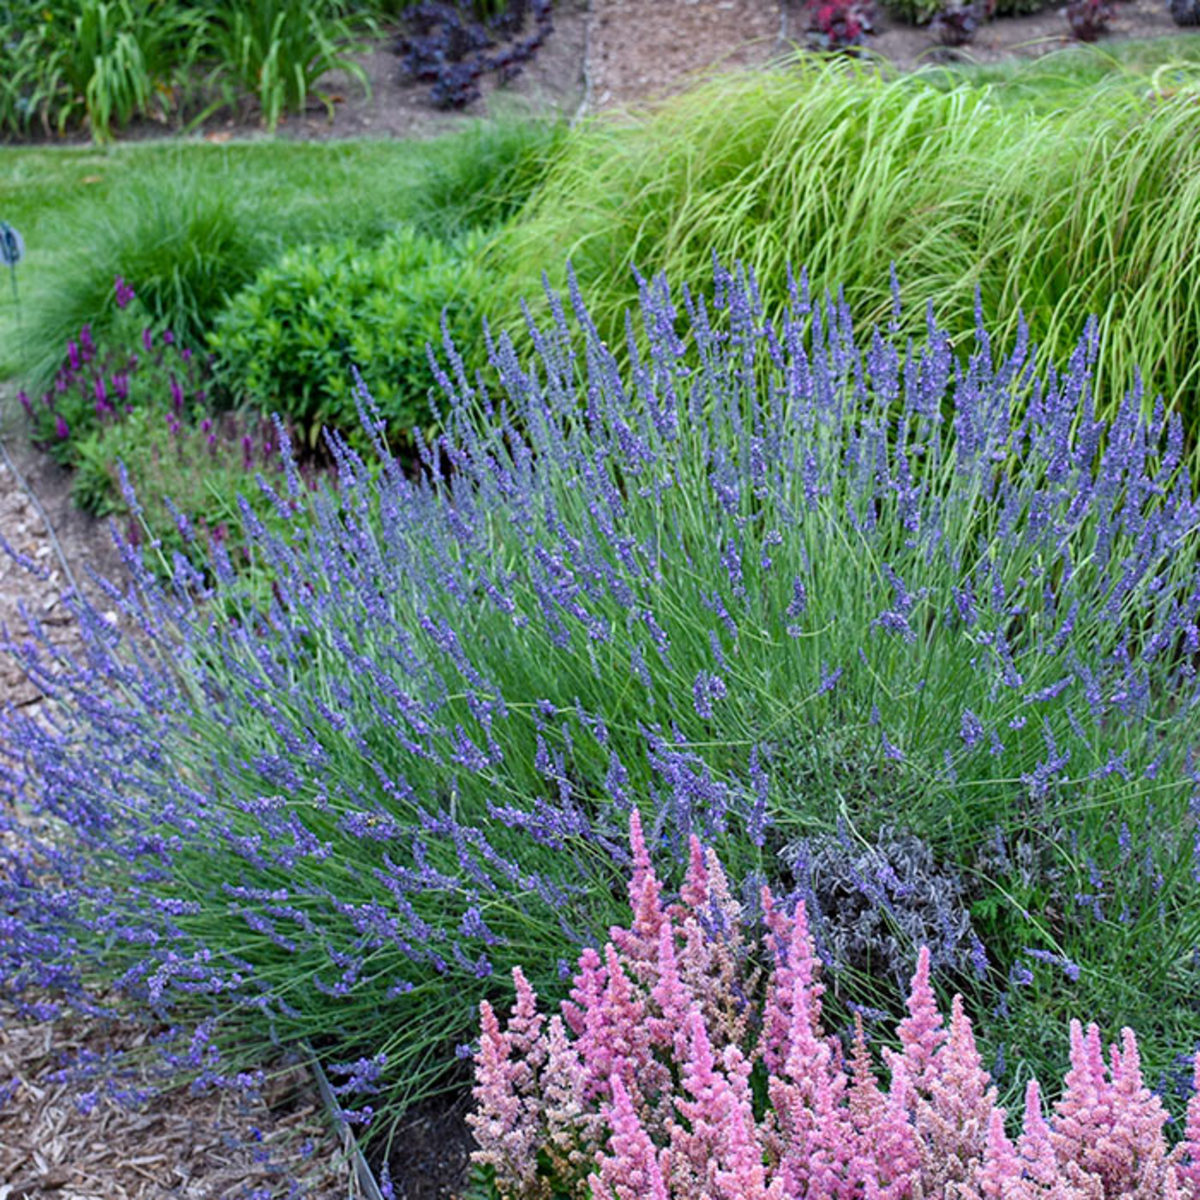 Phenomenal lavender, which withstands cold winters and hot, humid summers